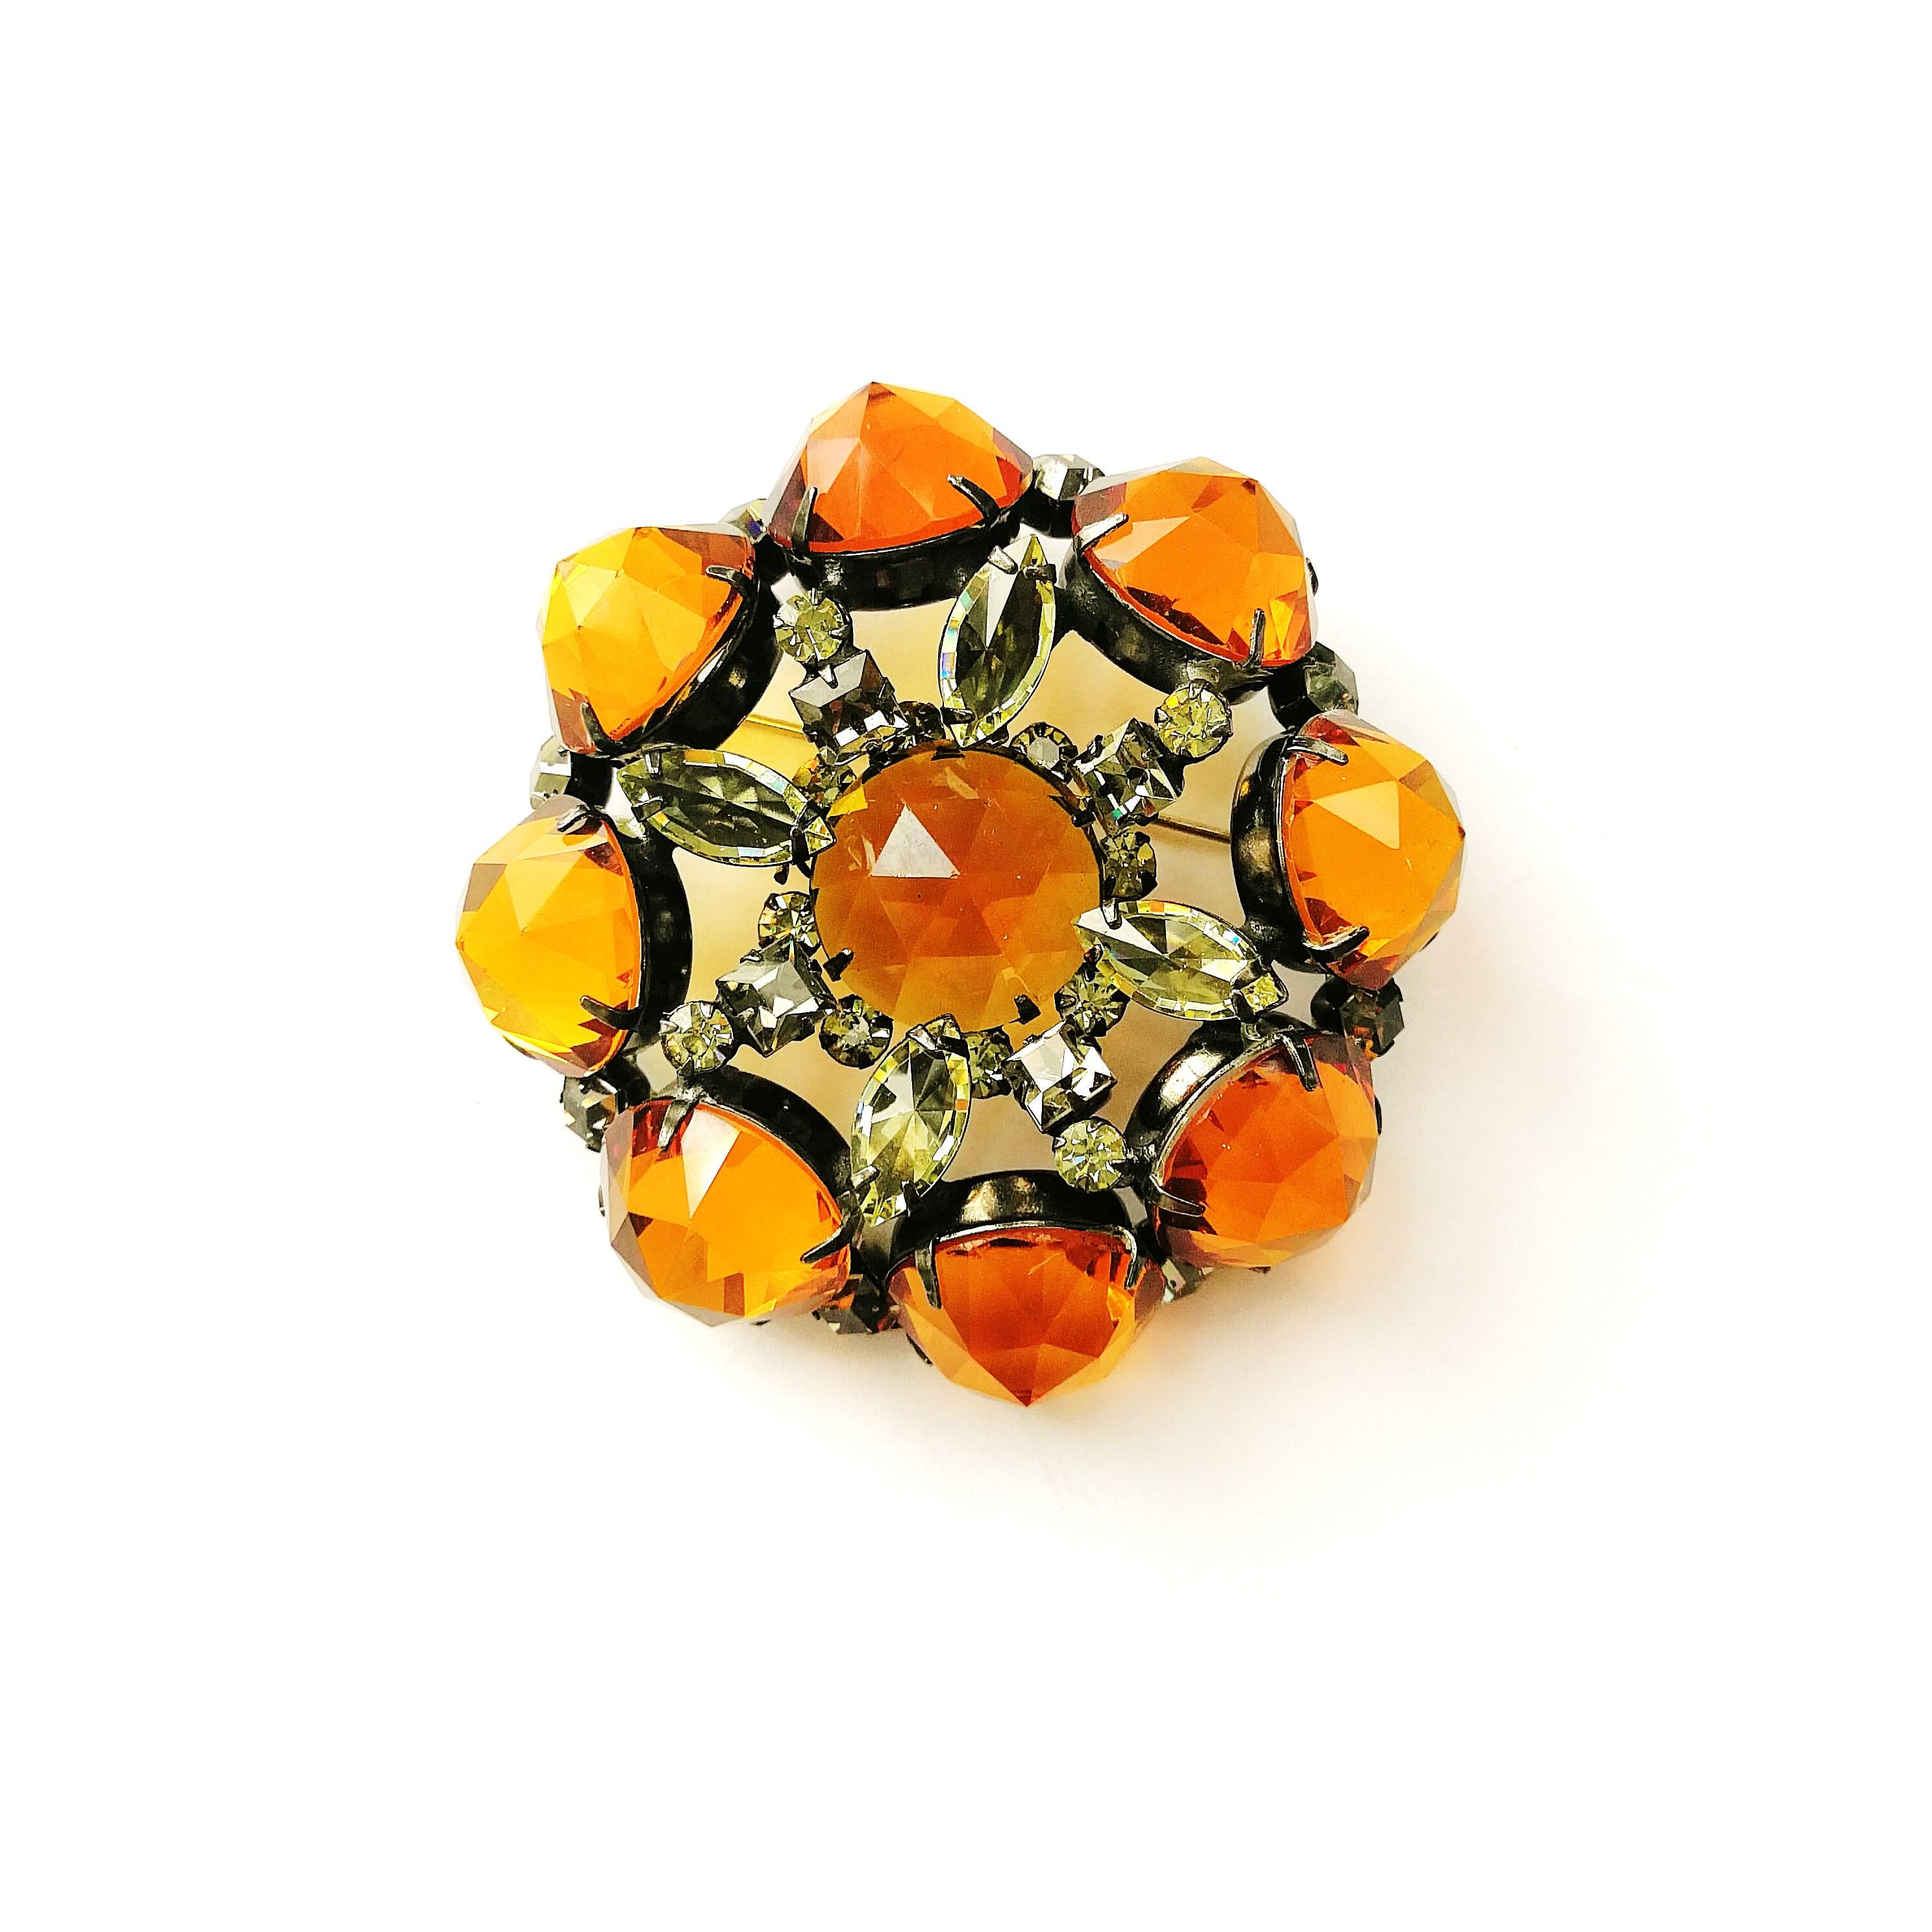 A very strong, beautiful brooch from Schreiner New York. Although unsigned, this has all the hallmarks of Schreiner designs - the characteristic 'reversed' stones, the colour combination and overall designs. Lovely deep rich round topaz, oblong